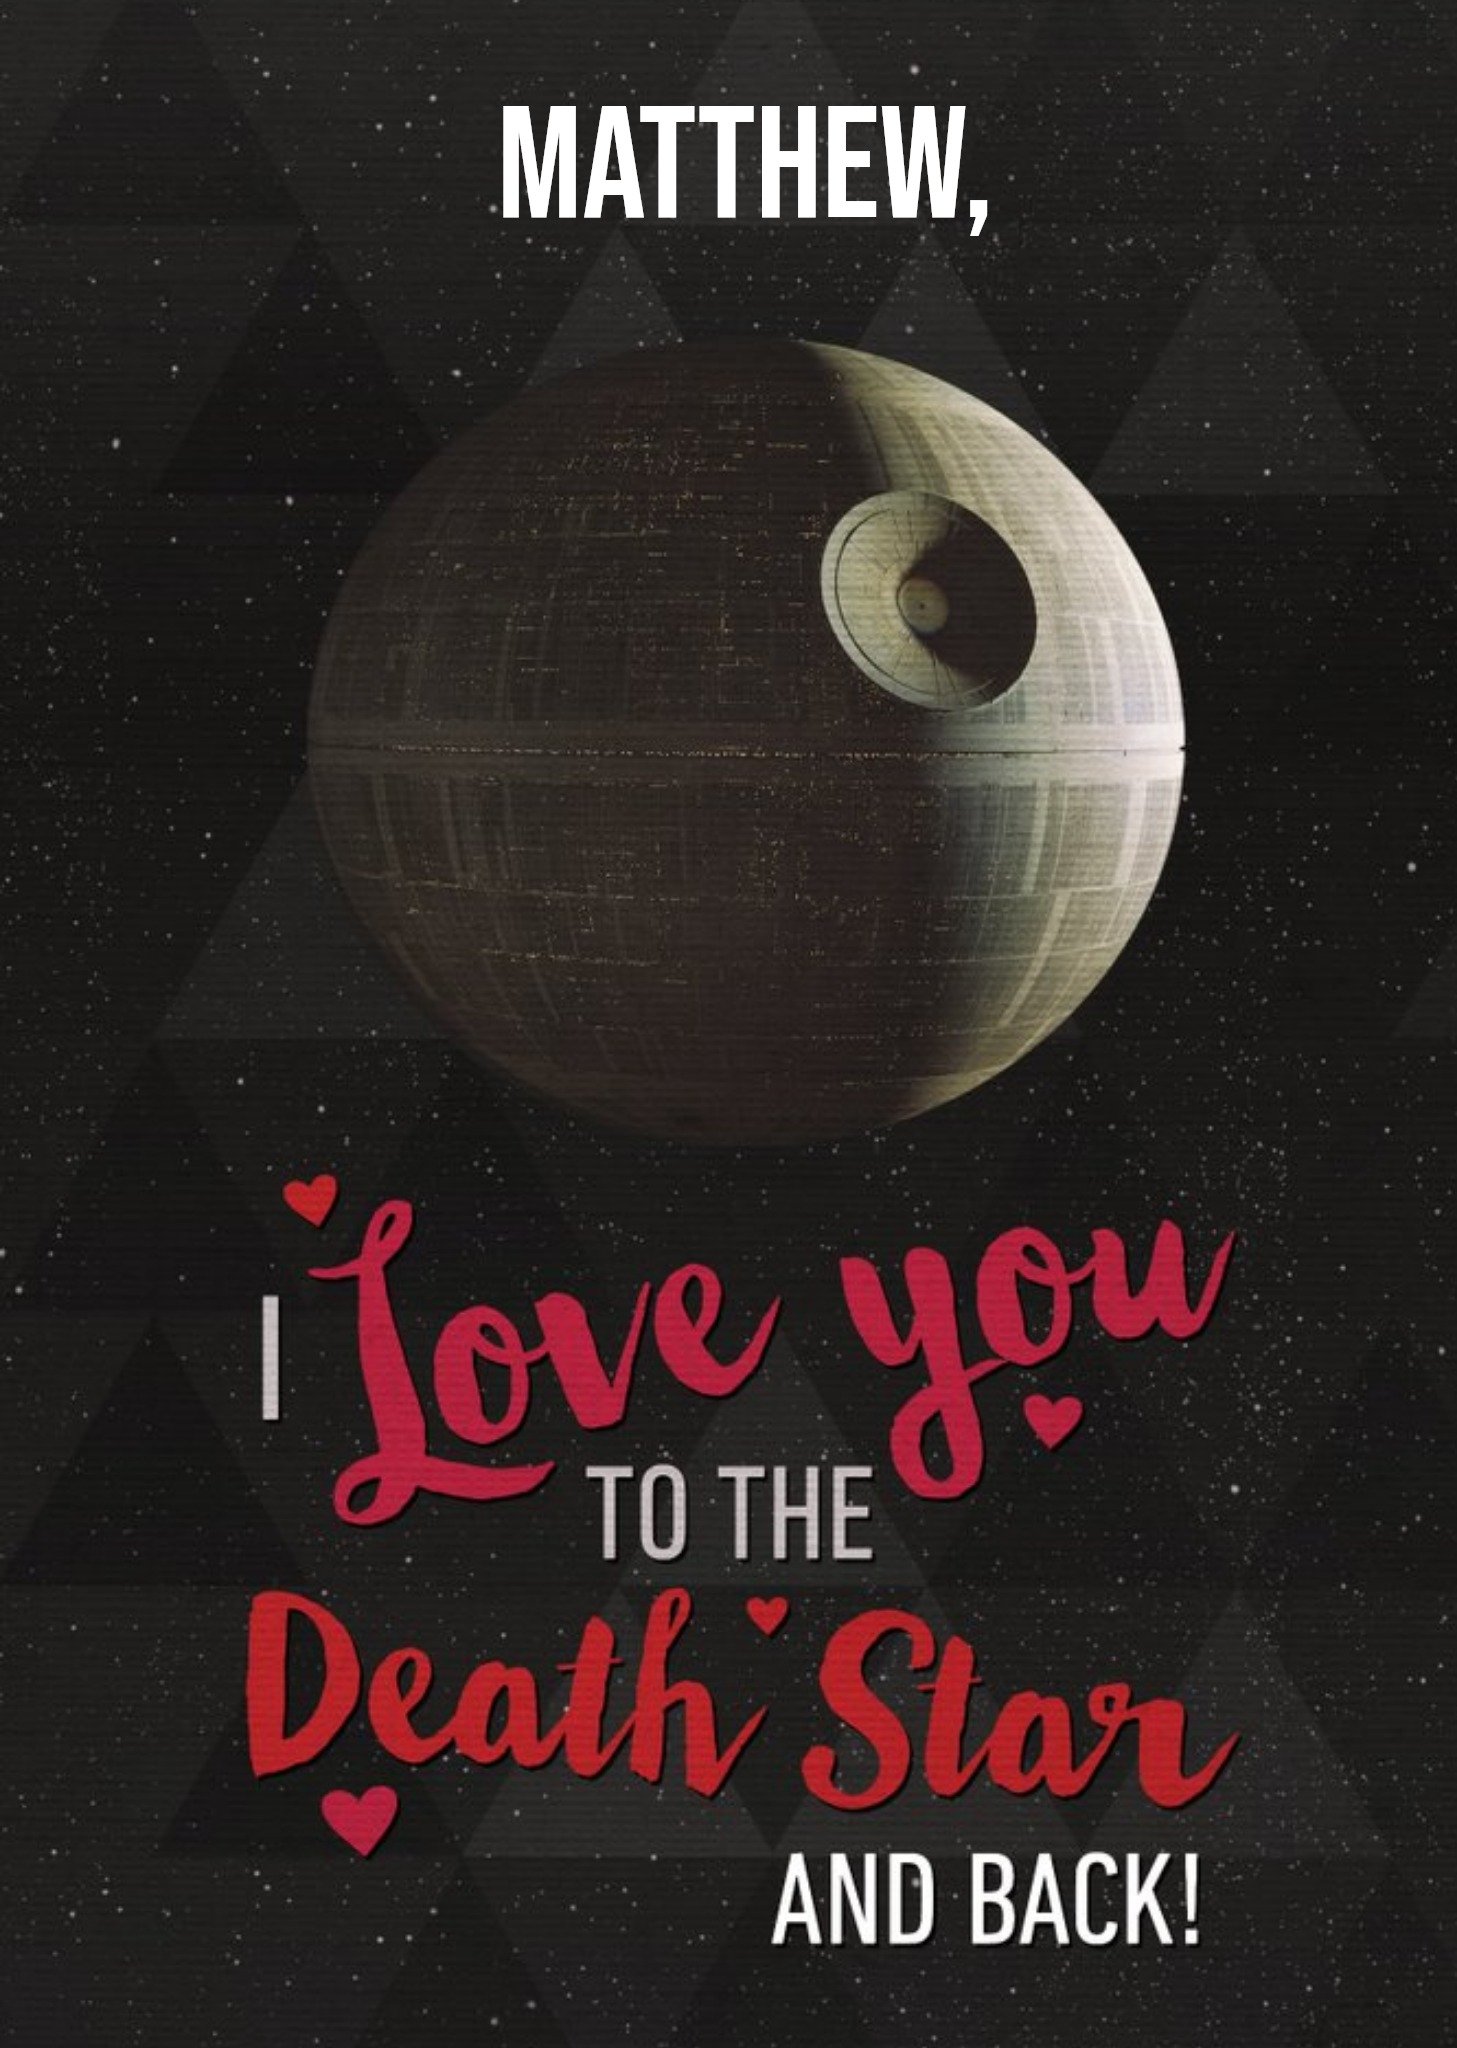 Disney Star Wars I Love You To The Death Star And Back Valentines Day Card, Large